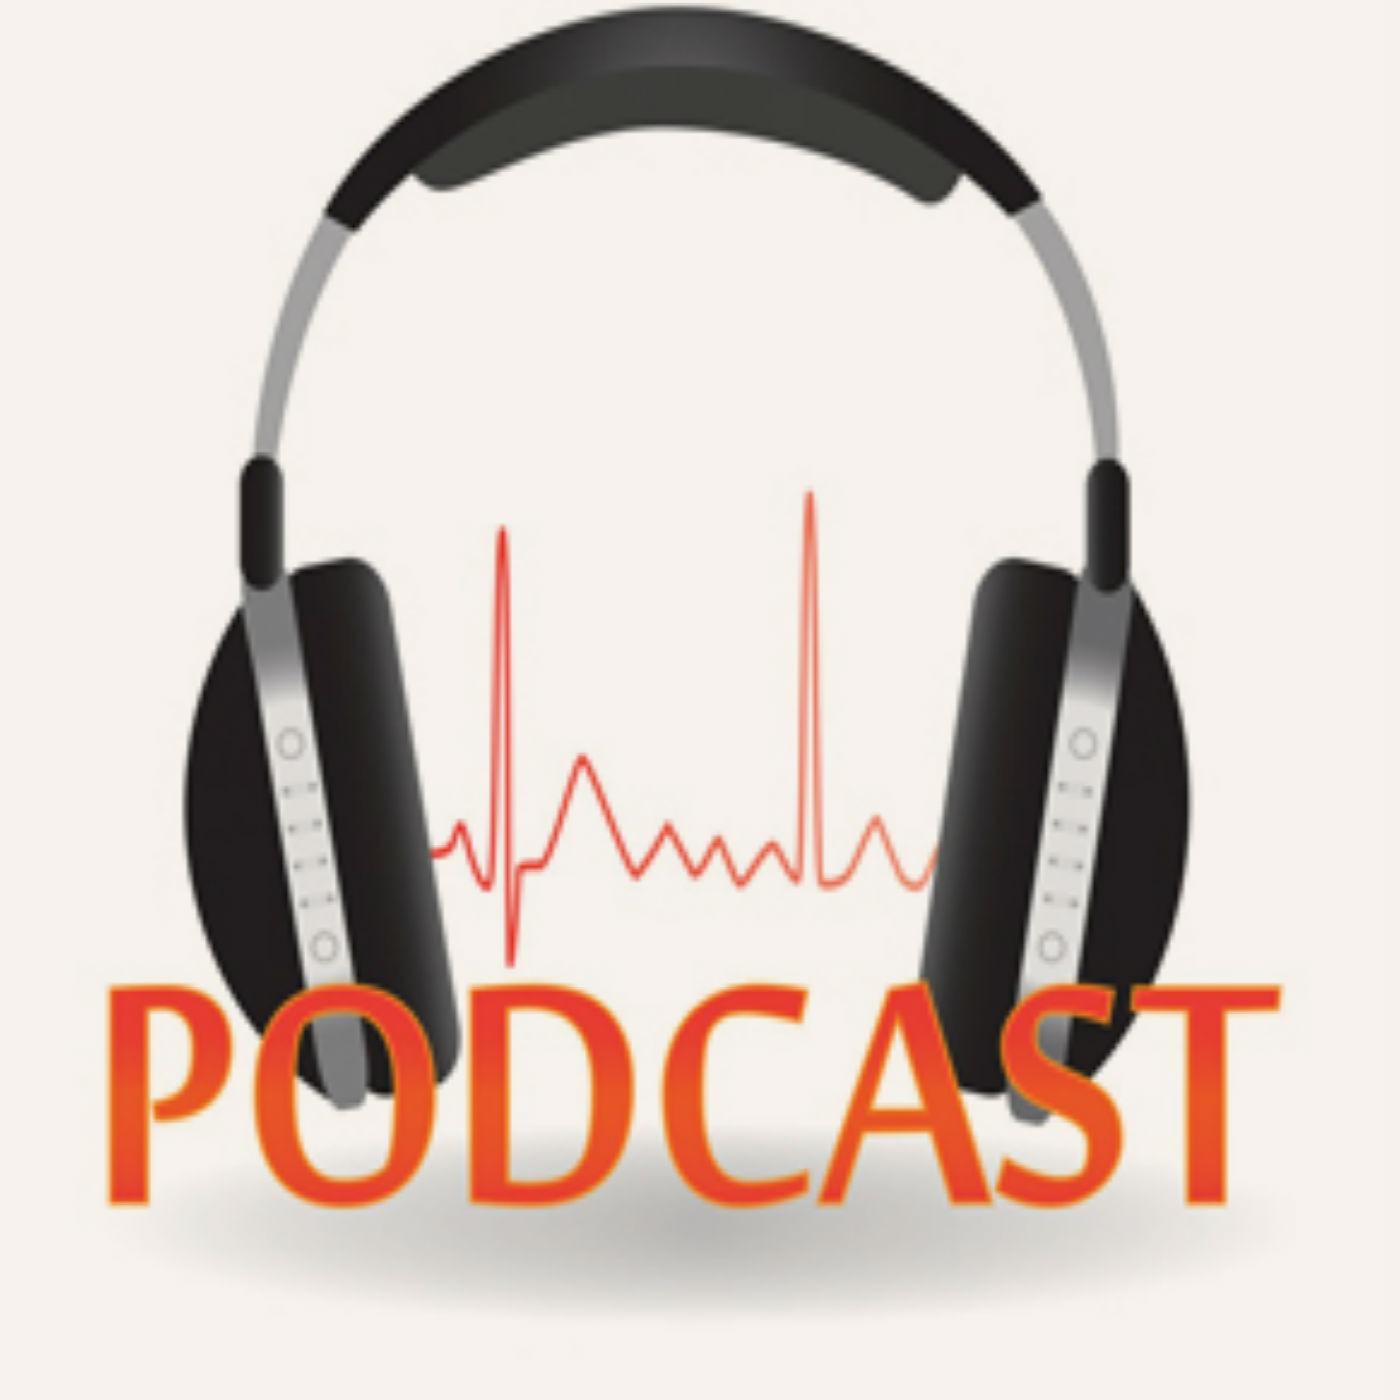 Make your podcast grow with podcast transcription services